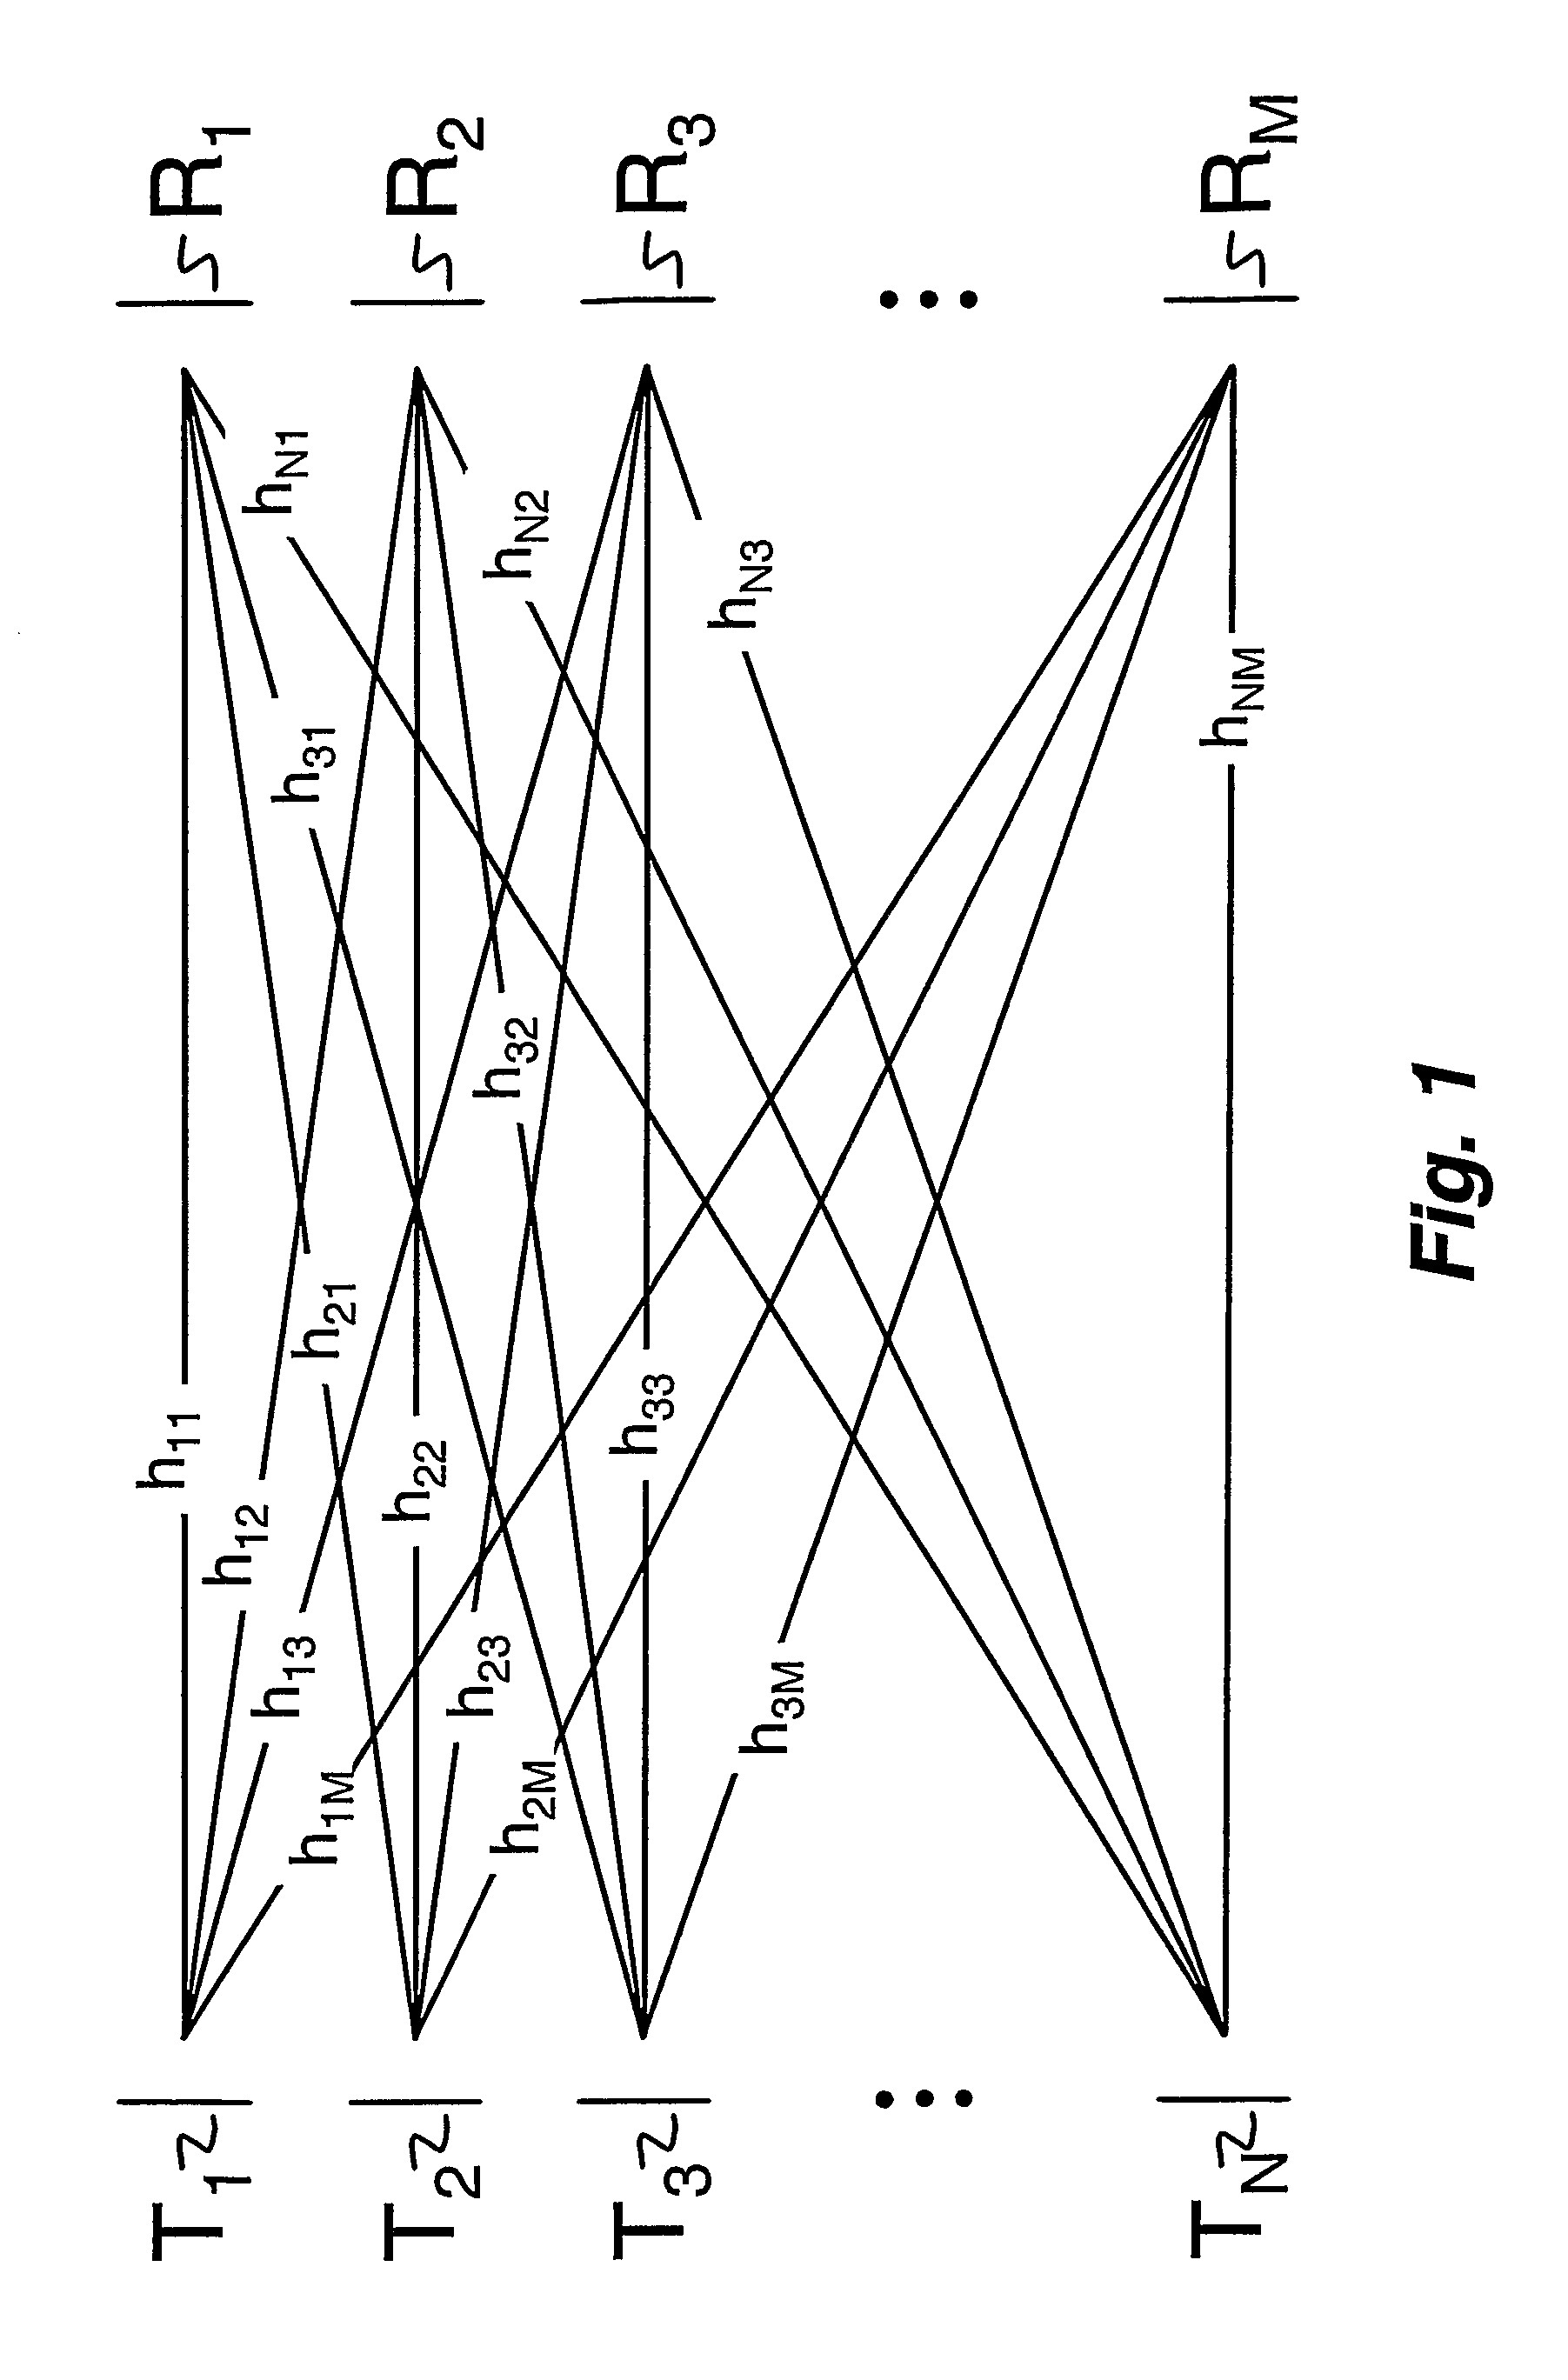 Method and system of communications for high data rate transmission